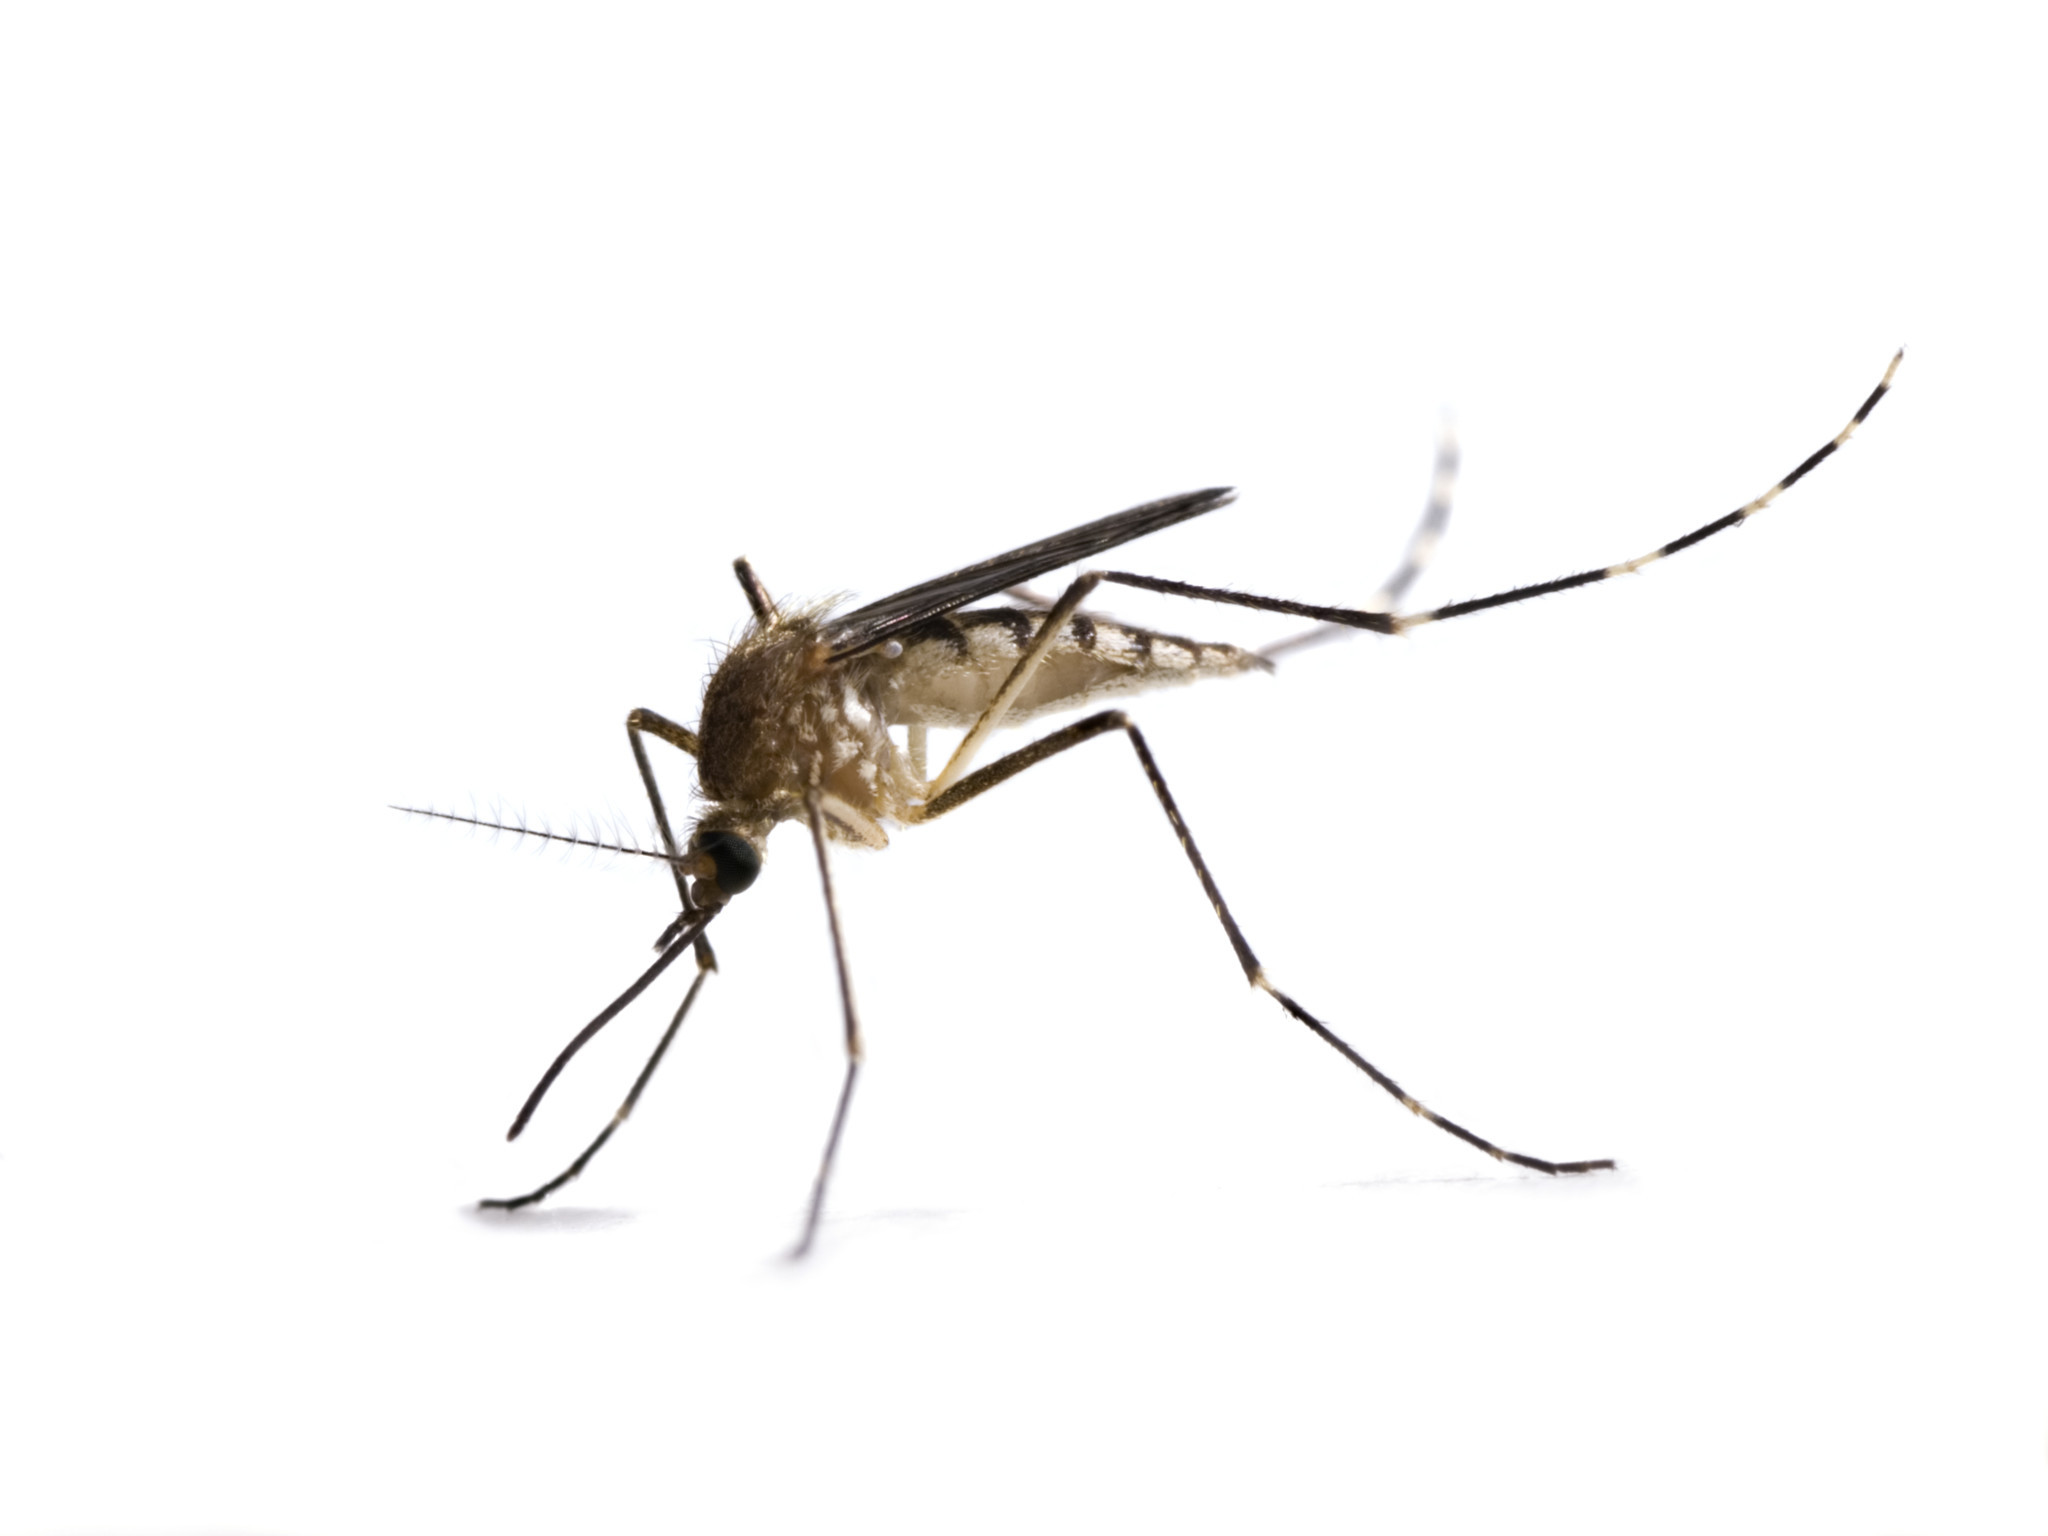 U.S. saw increase in West Nile virus cases last year, CDC says